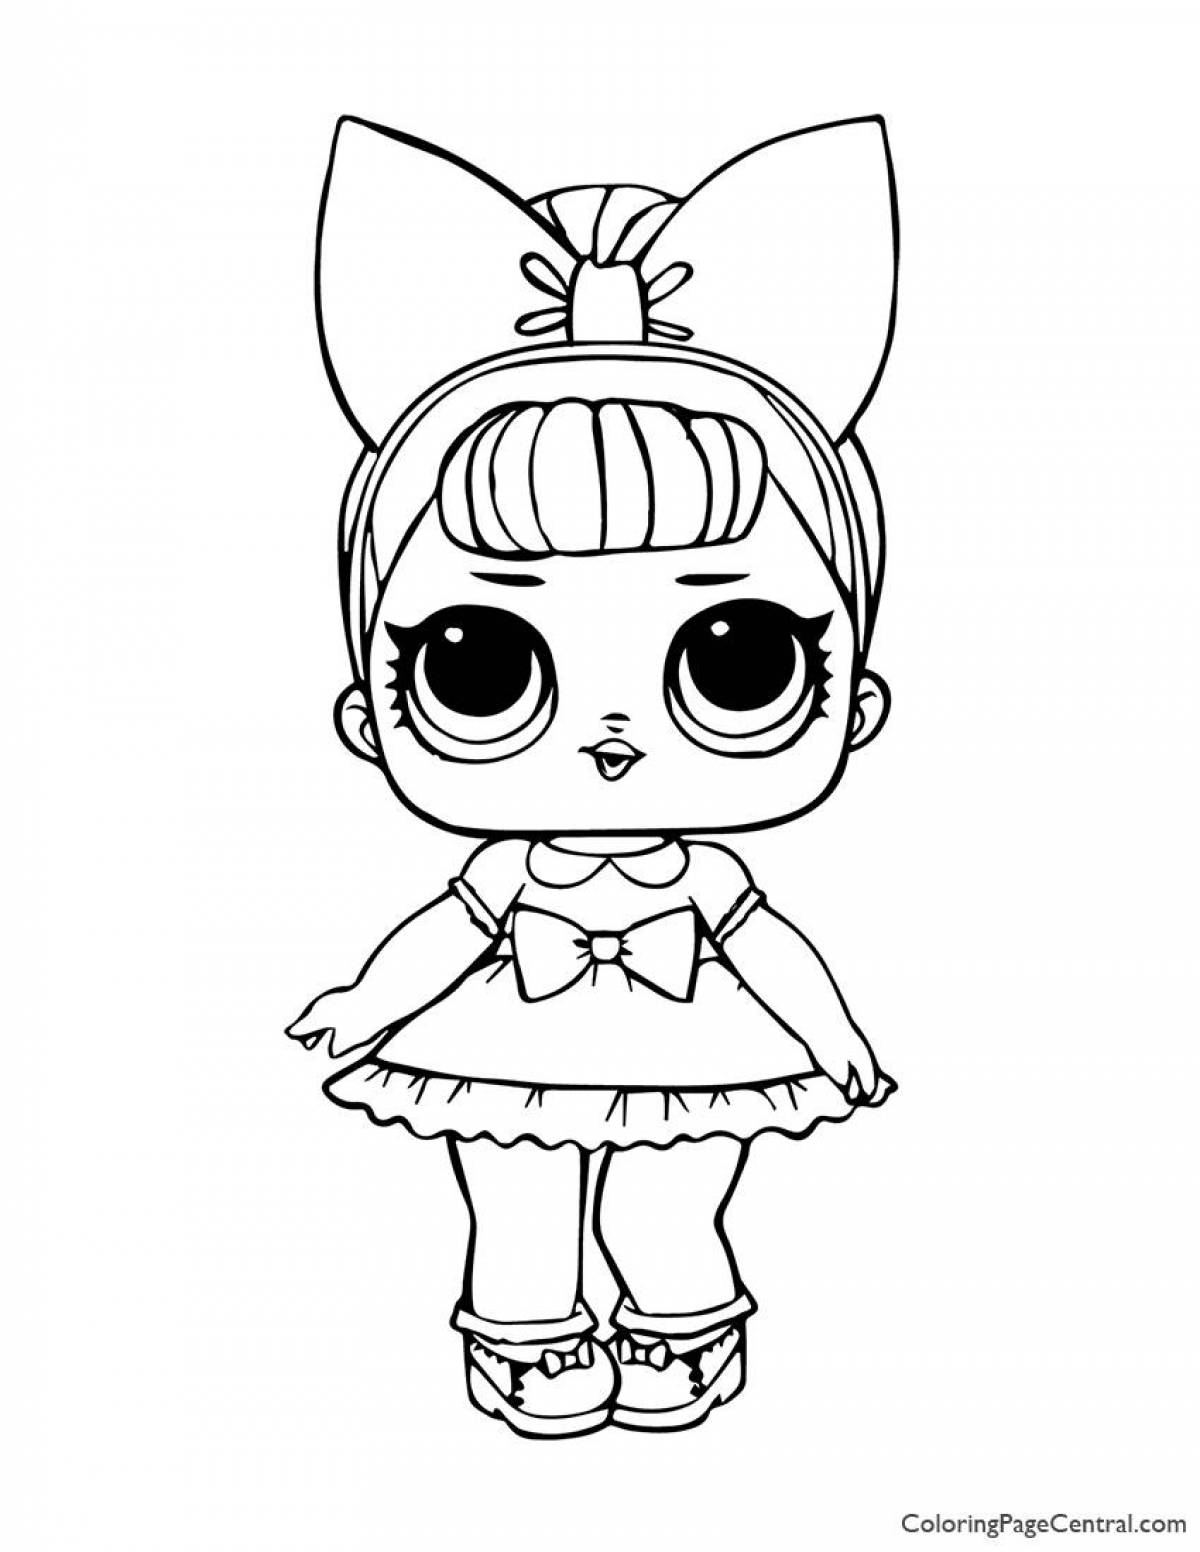 Sweet lola doll coloring